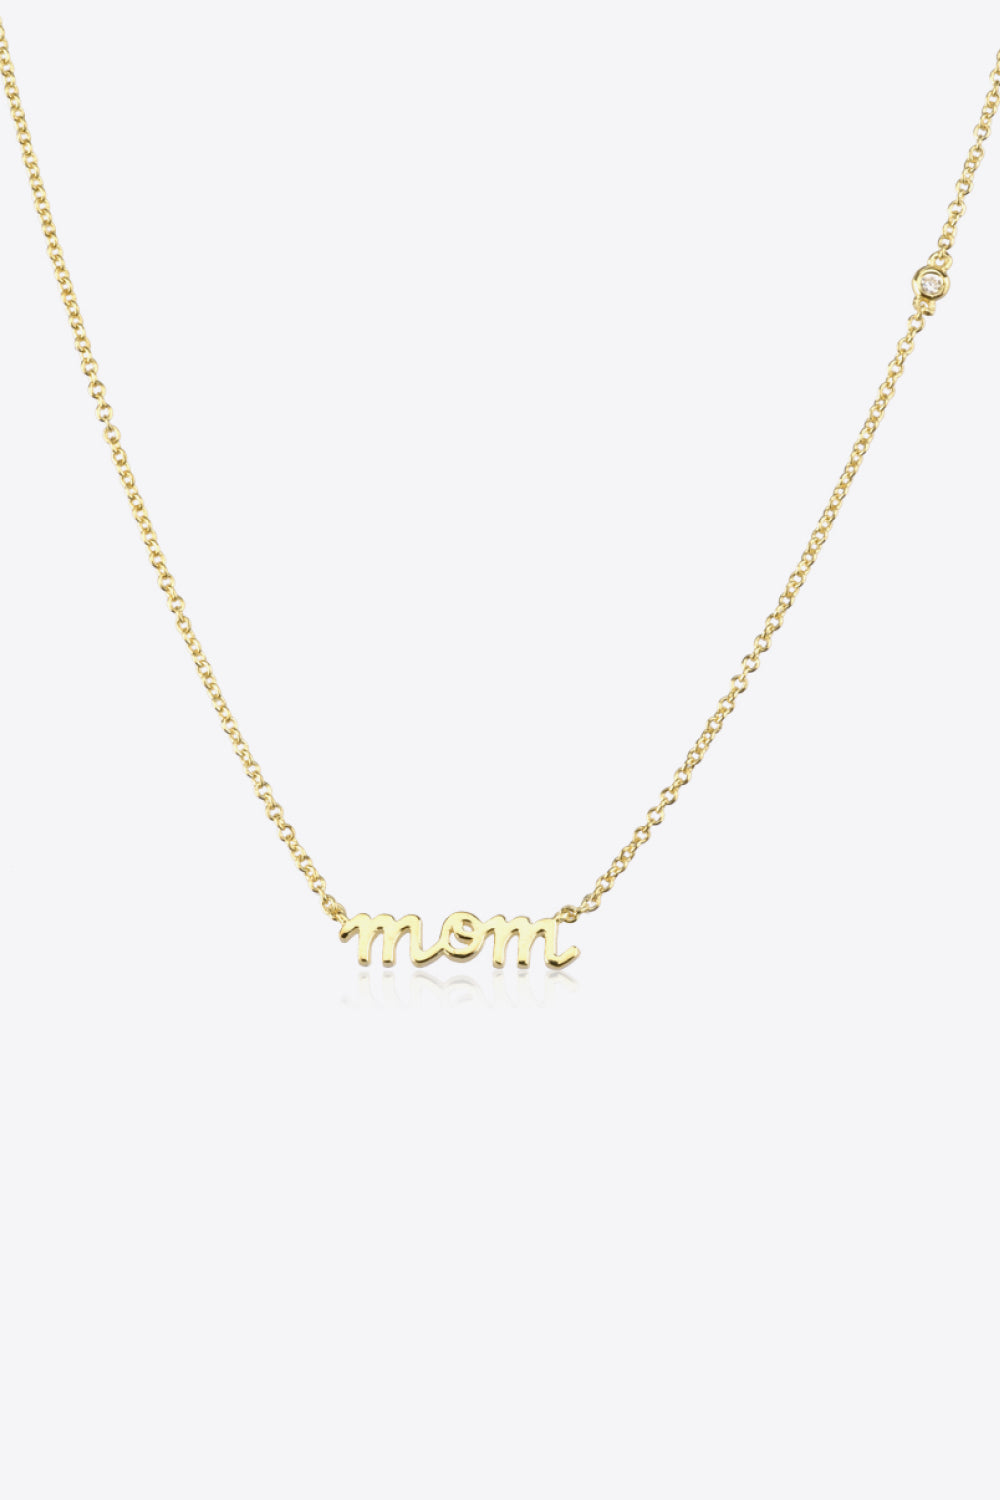 GOLD ONE SIZE MOM 925 Sterling Silver Necklace - 2 colors - necklace at TFC&H Co.